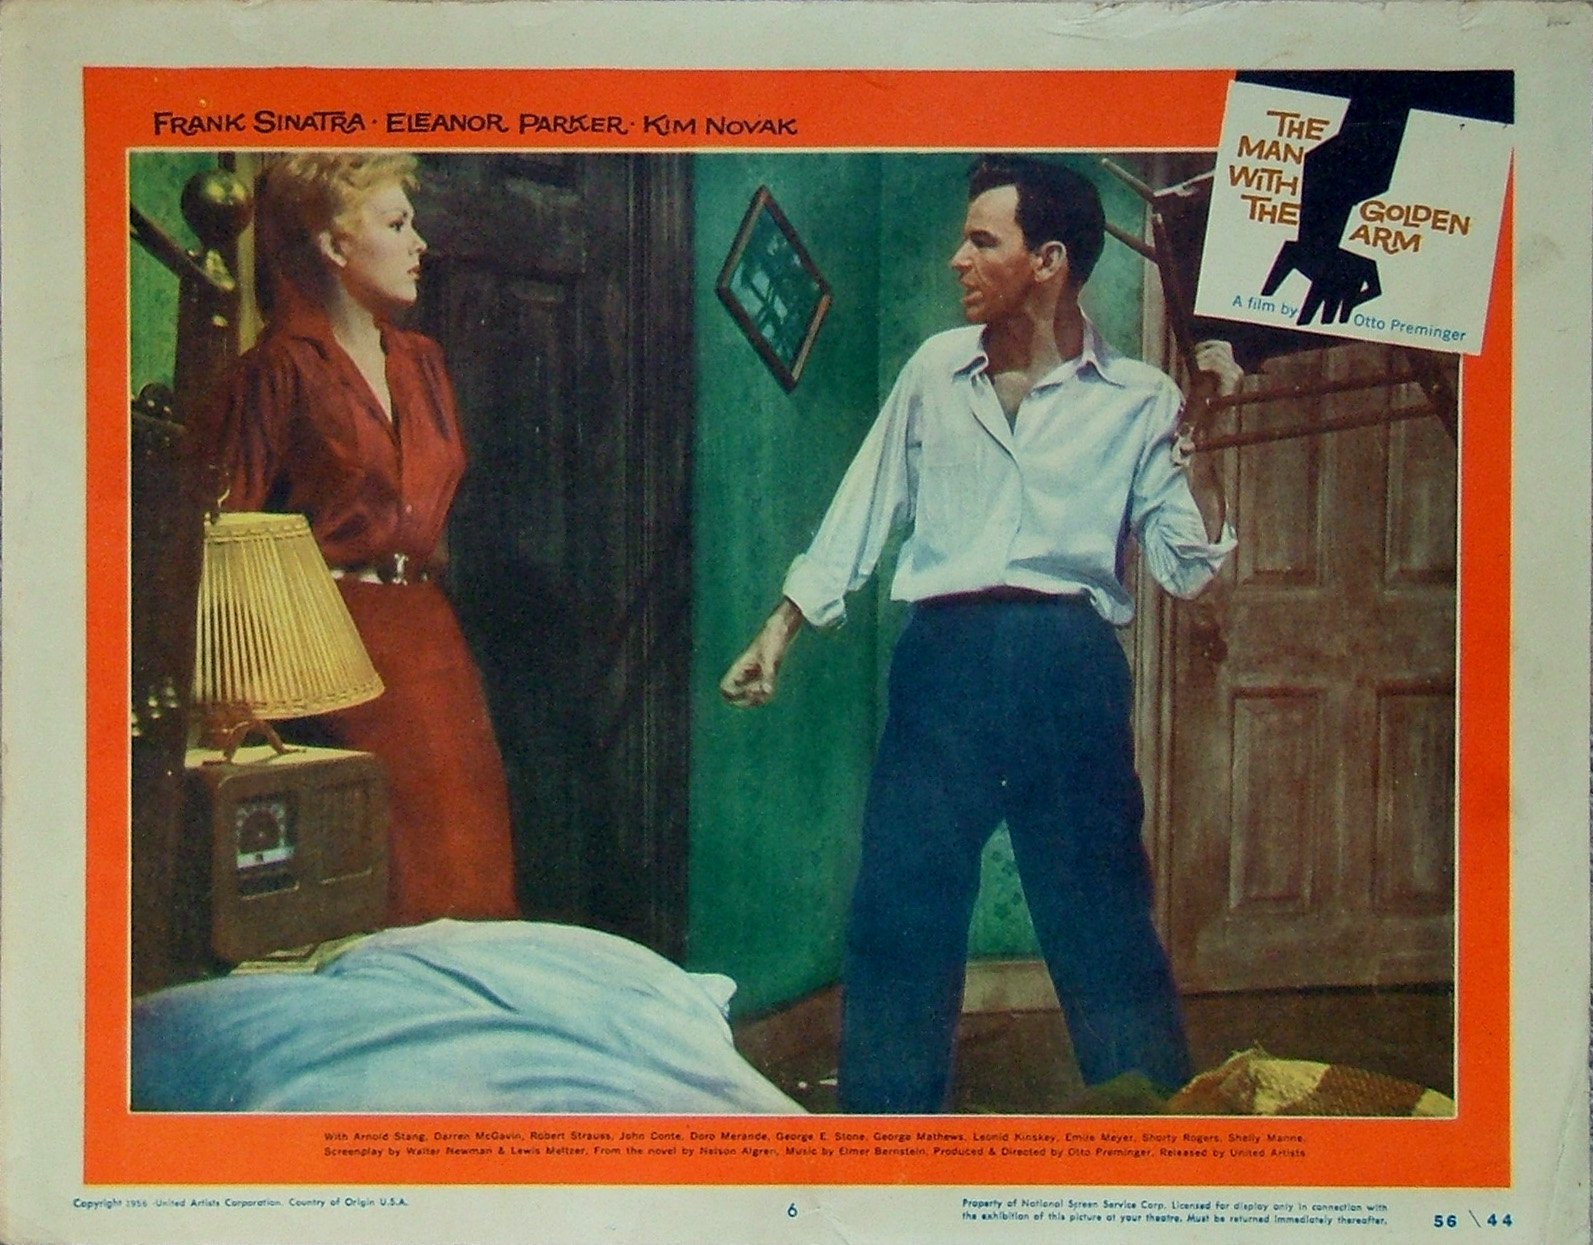 Original vintage cinema lobby card movie poster for The Man With the Golden Arm